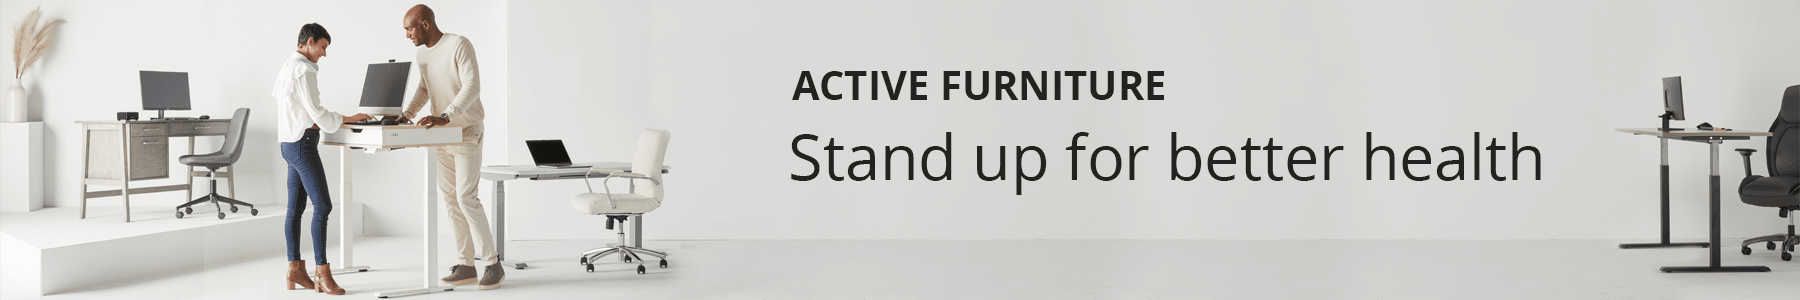 Active Furniture Stand up for Better Health